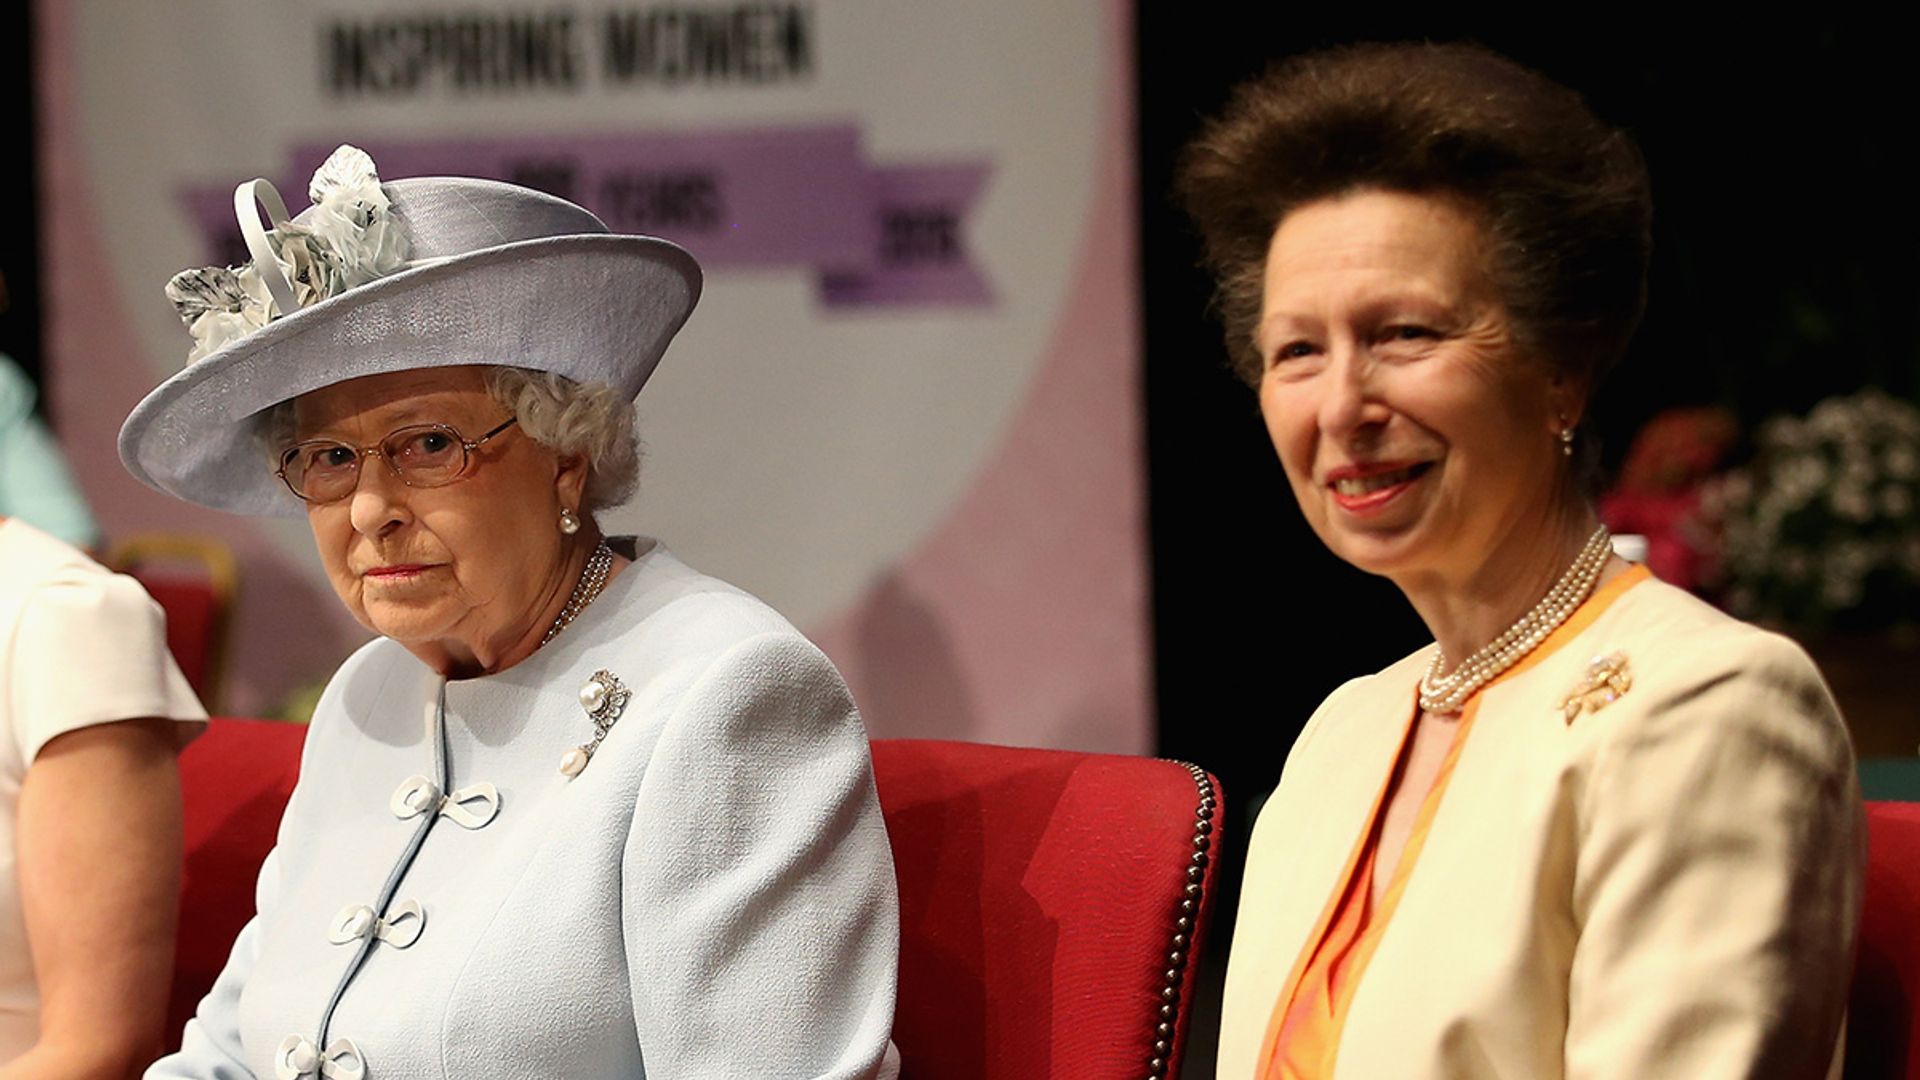 The Queen let Princess Anne live in top royal palace instead - here's ...